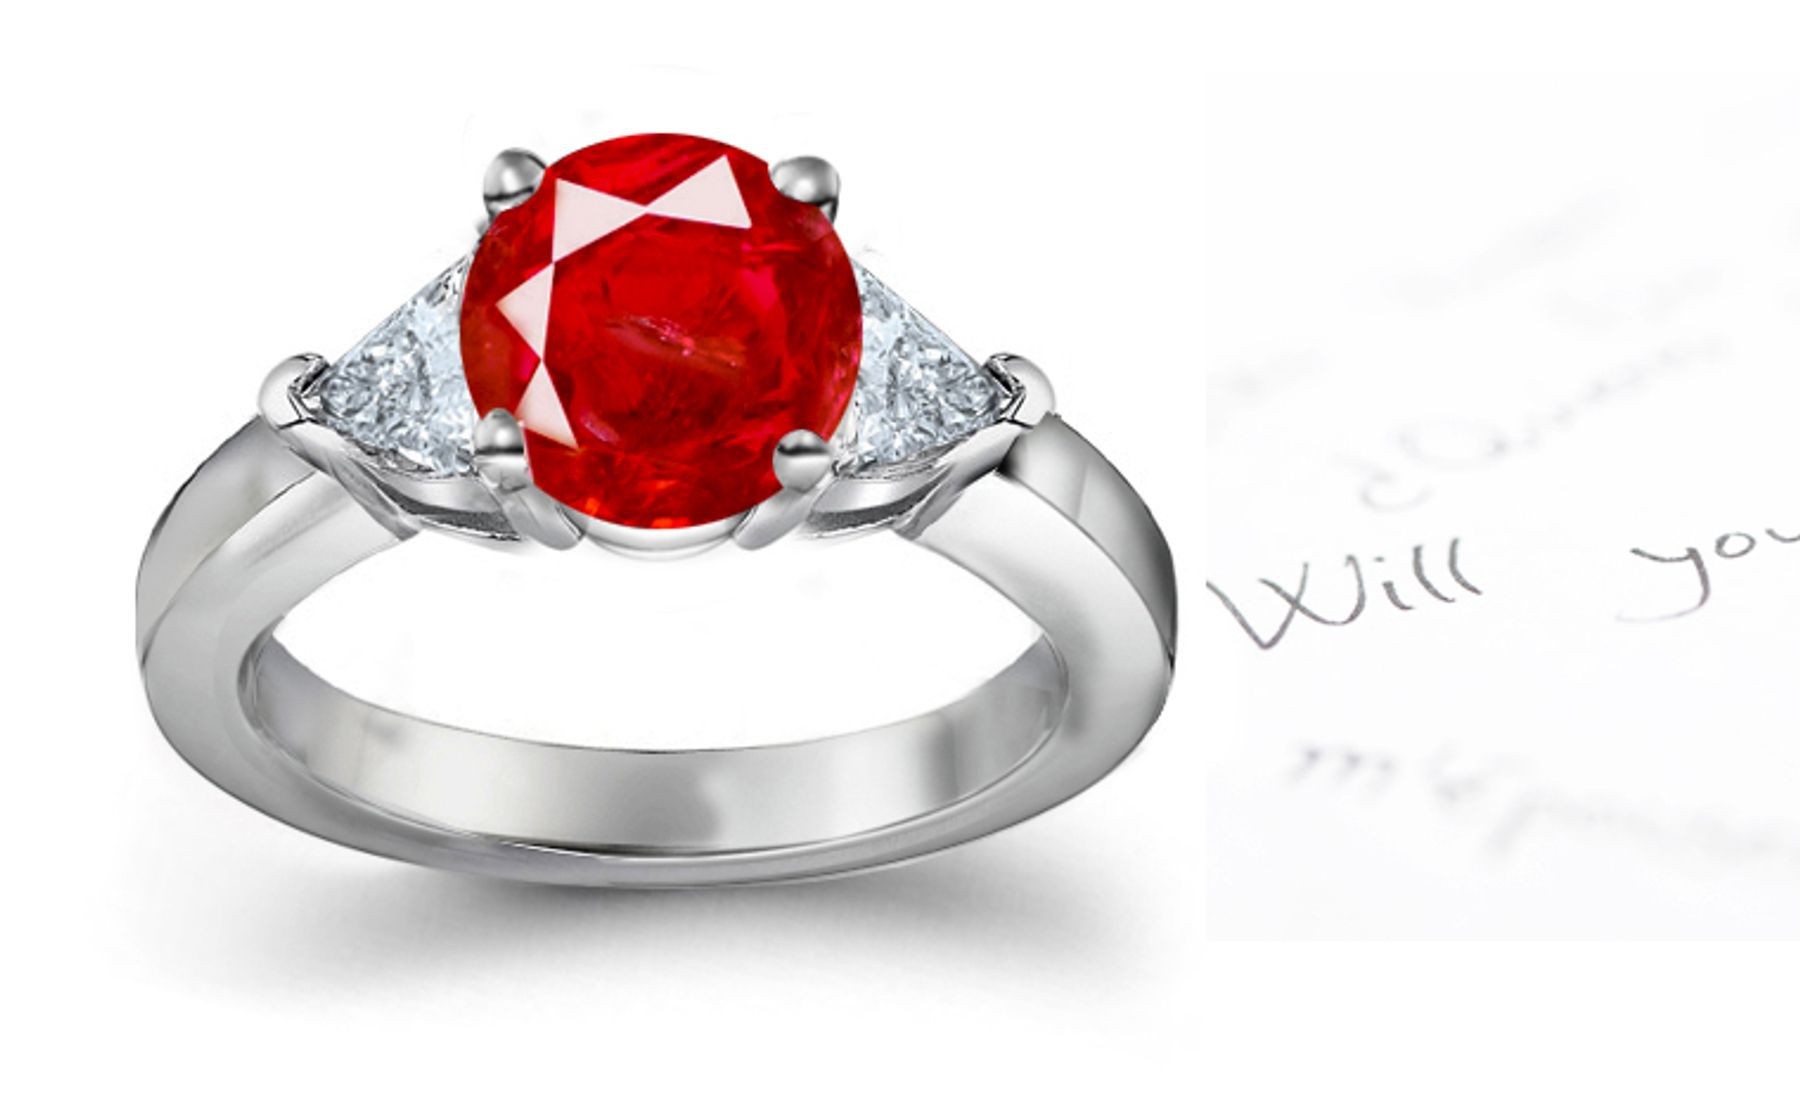 Royal Red Ruby Diamond Engagement Ring: Platinum three stone ruby ring set with a round ruby and two diamond pears.